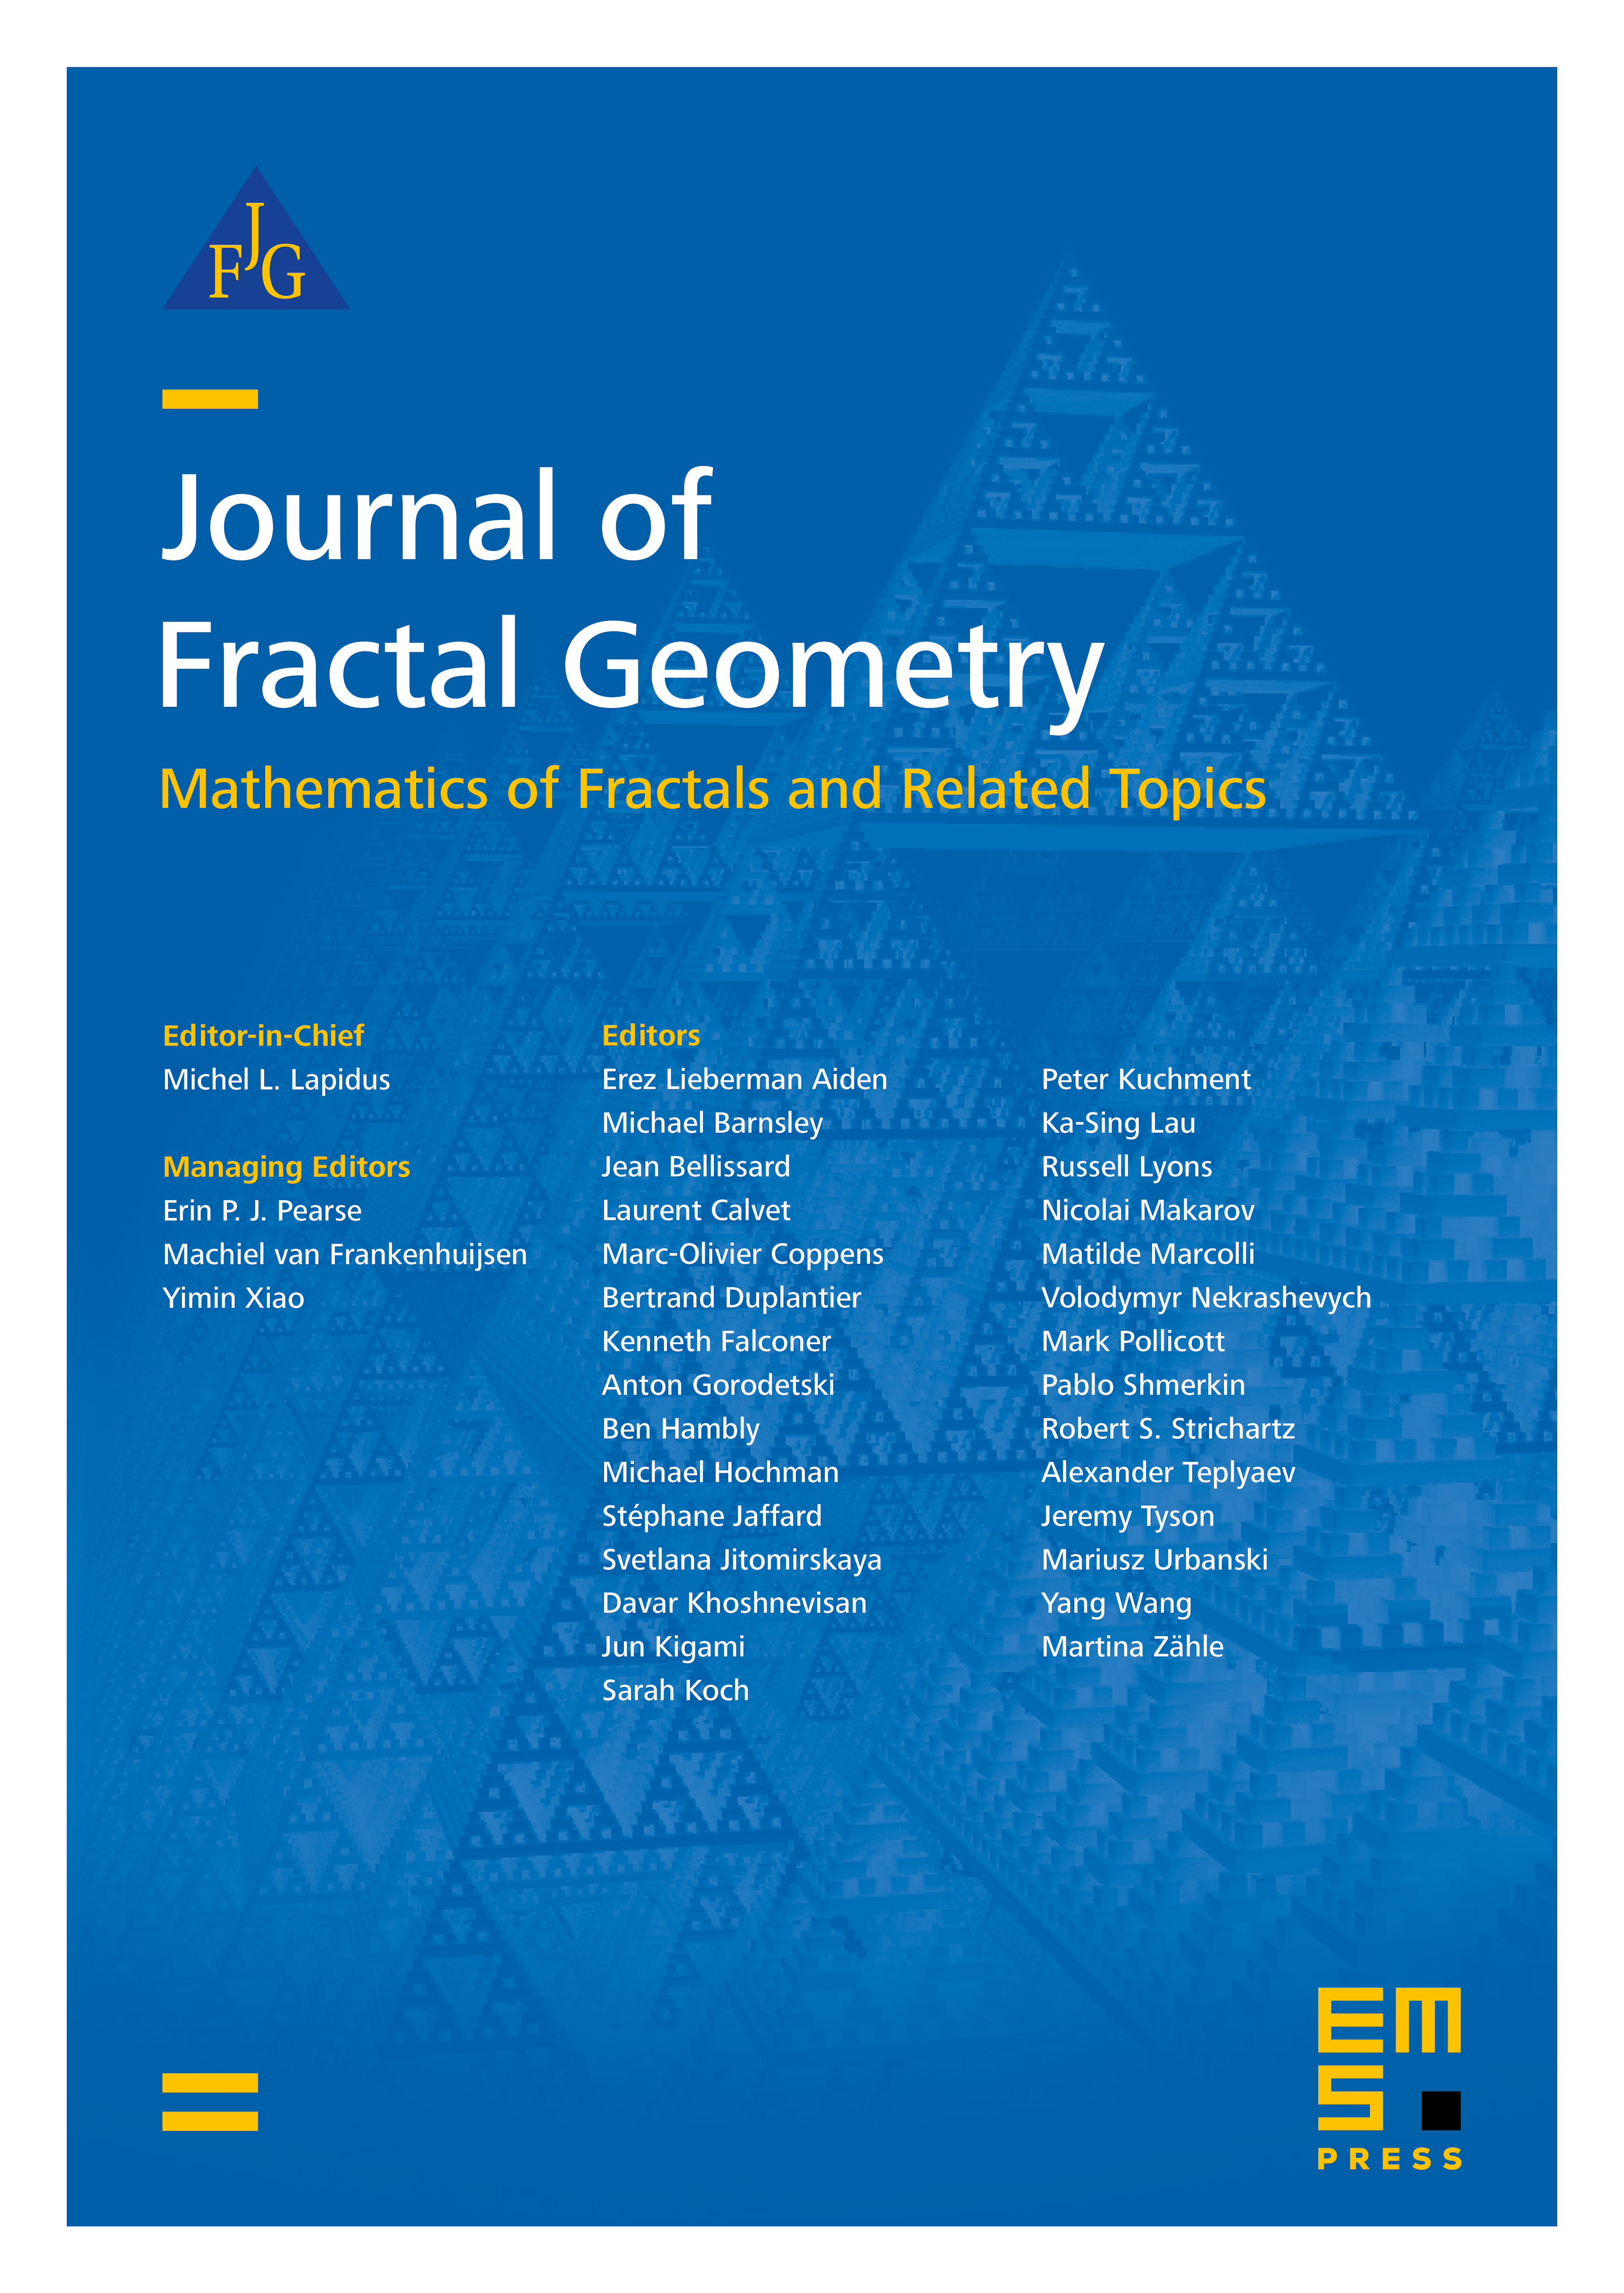 Transversal family of non-autonomous conformal iterated function systems cover